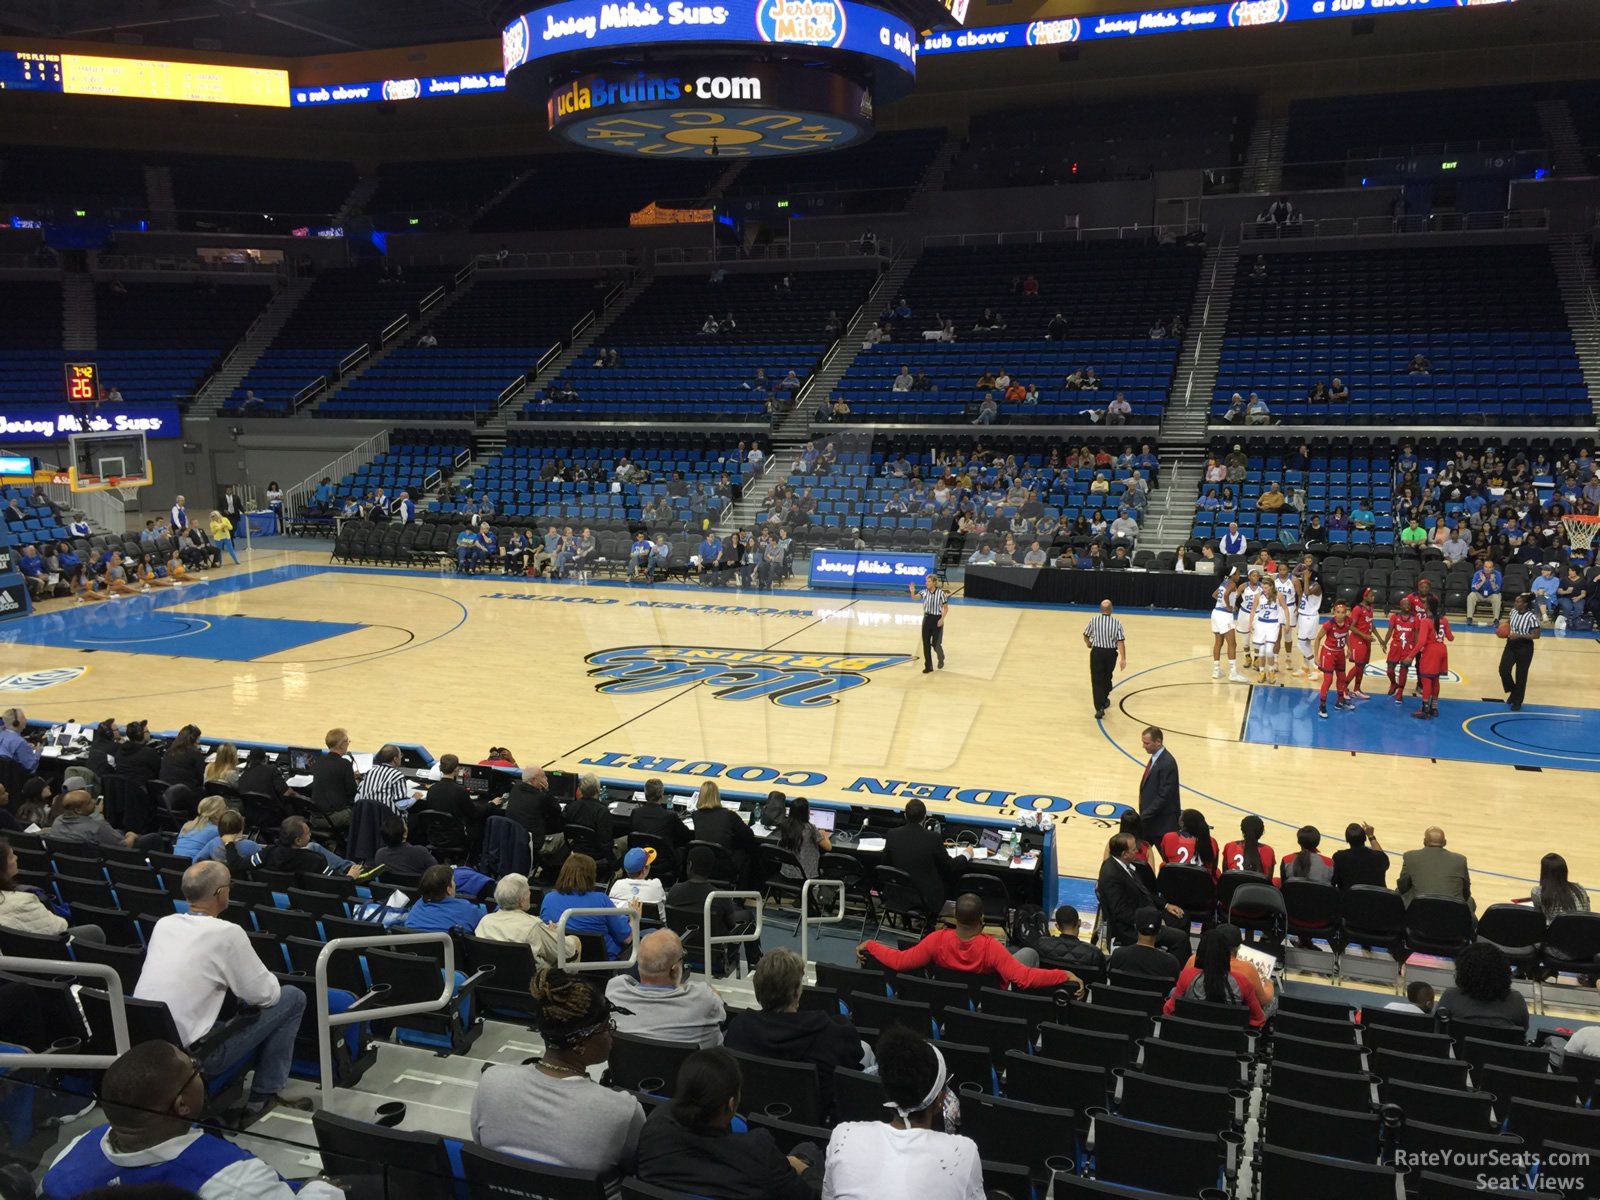 section 101, row 3 seat view  - pauley pavilion